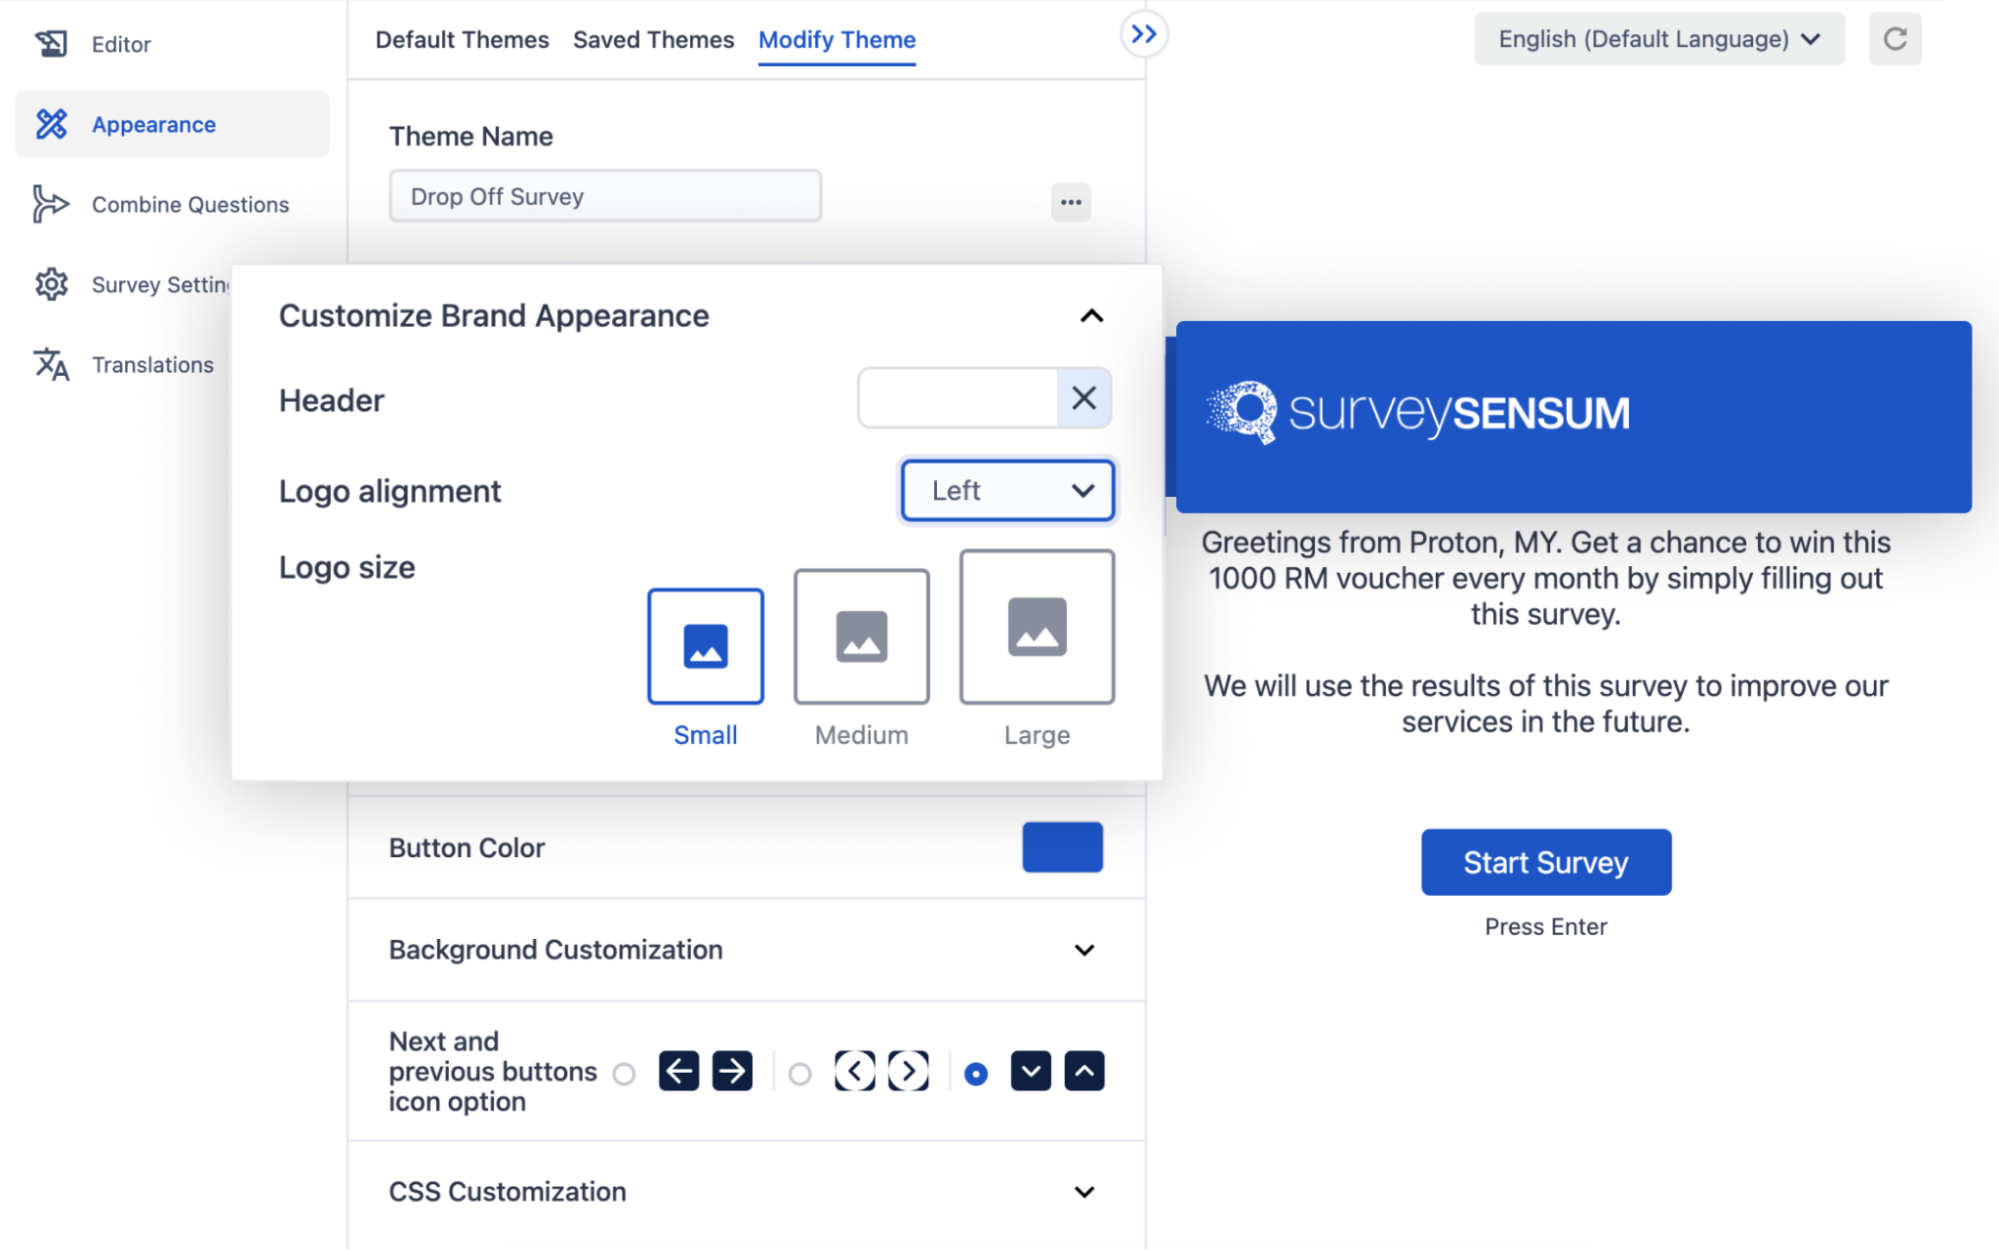 This is the image of the White-labeling feature of SurveySensum where users can edit the appearance of the survey and customize the appearance of their surveys to match their brand’s identity.